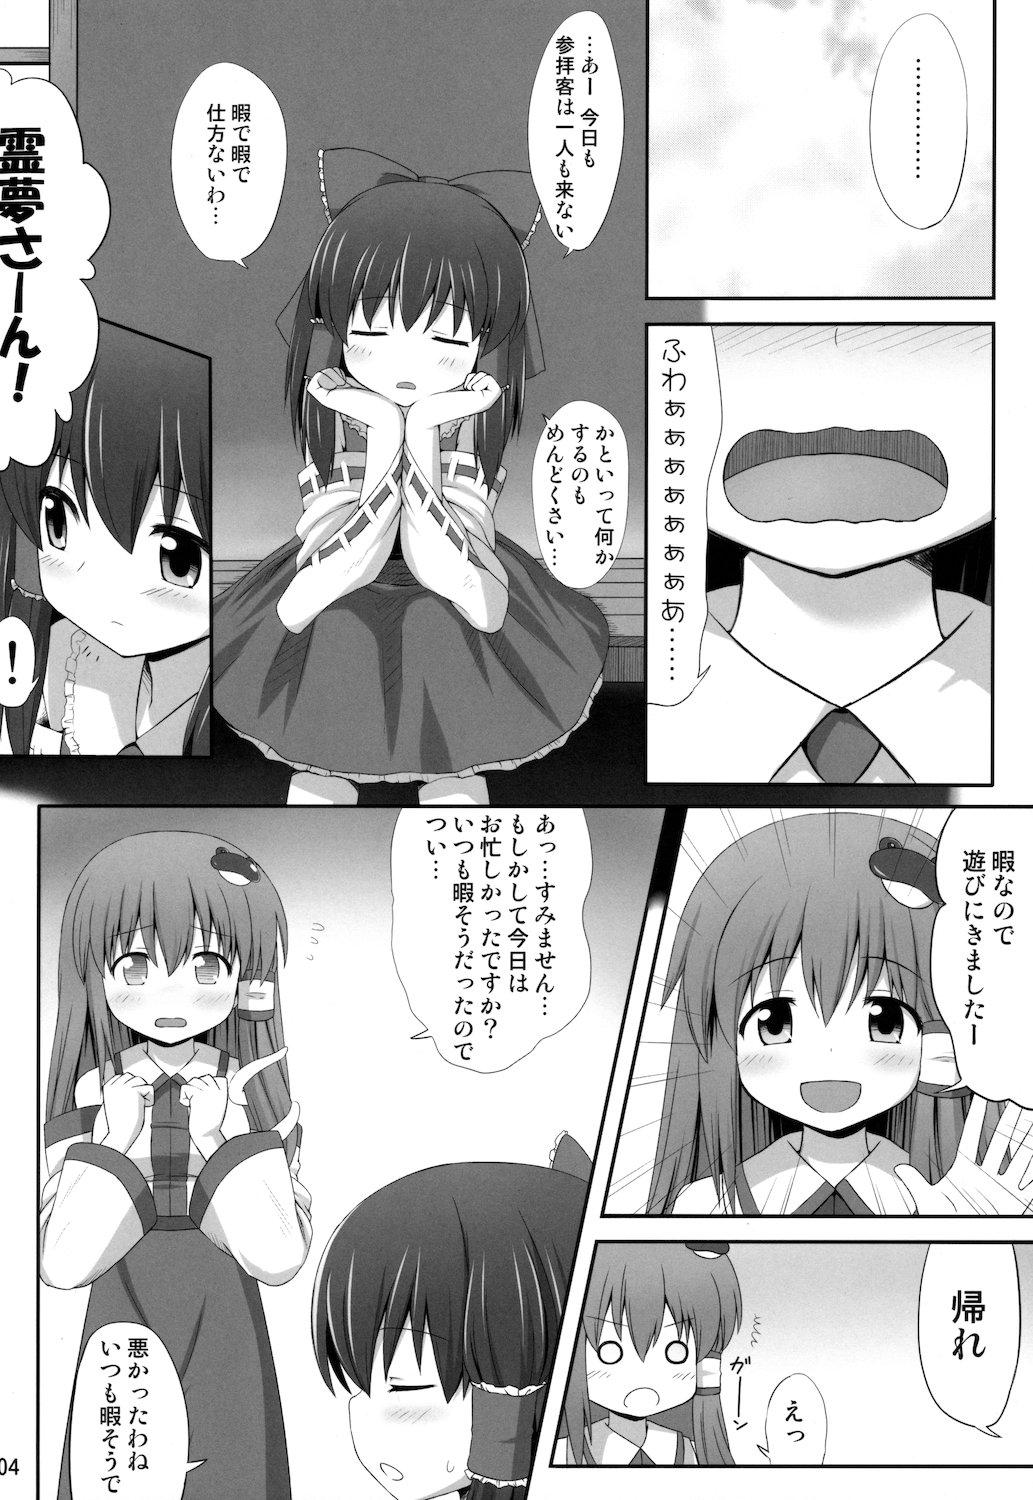 Butts Inyoku no Miko - Touhou project Chunky - Page 4